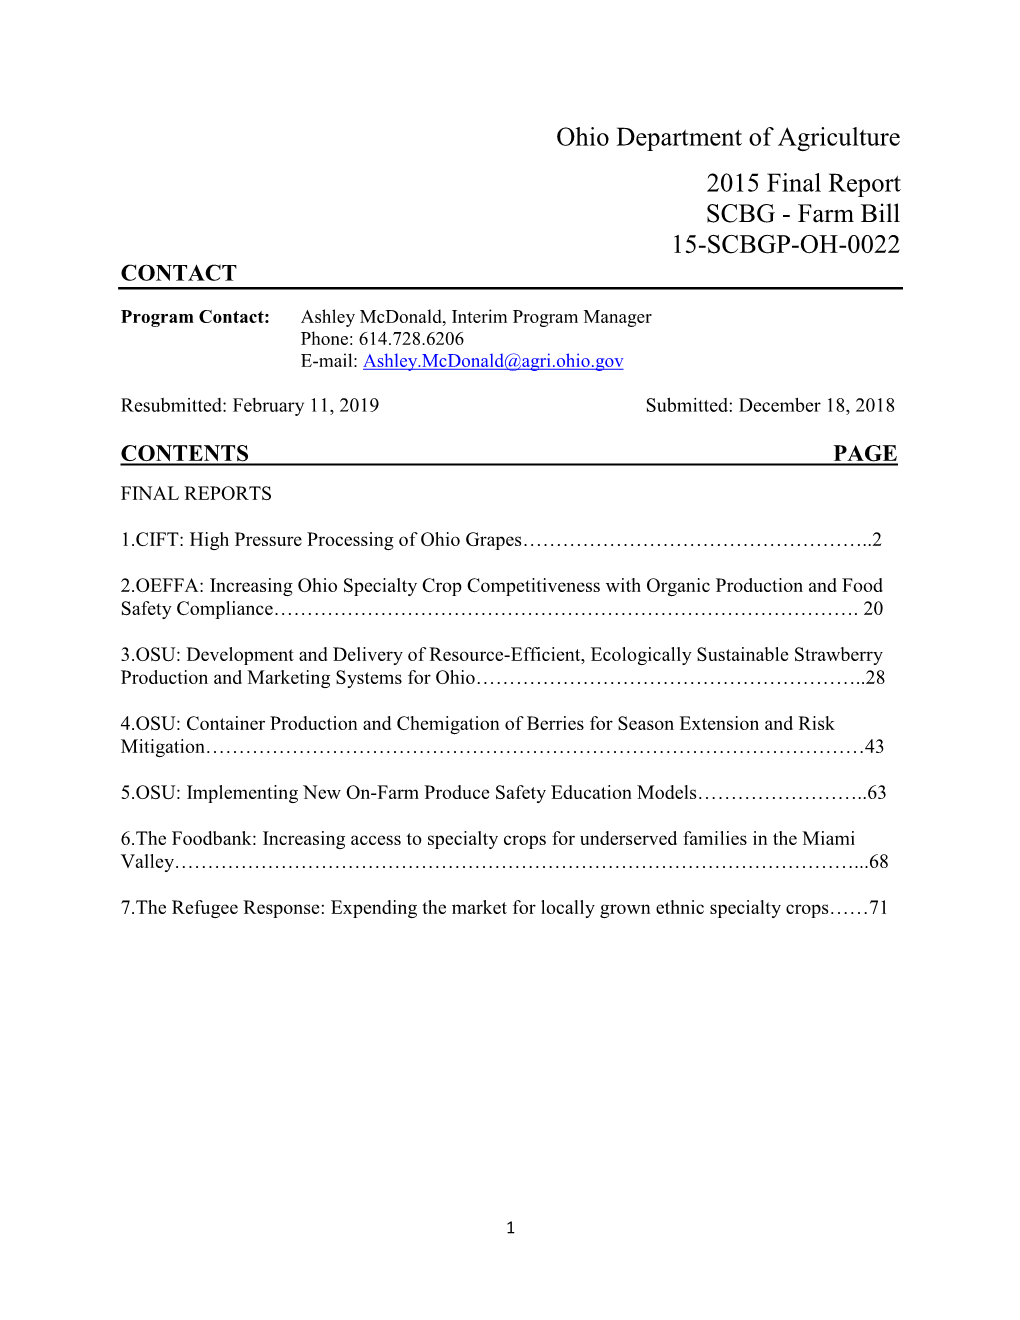 Ohio Department of Agriculture 2015 Final Report SCBG